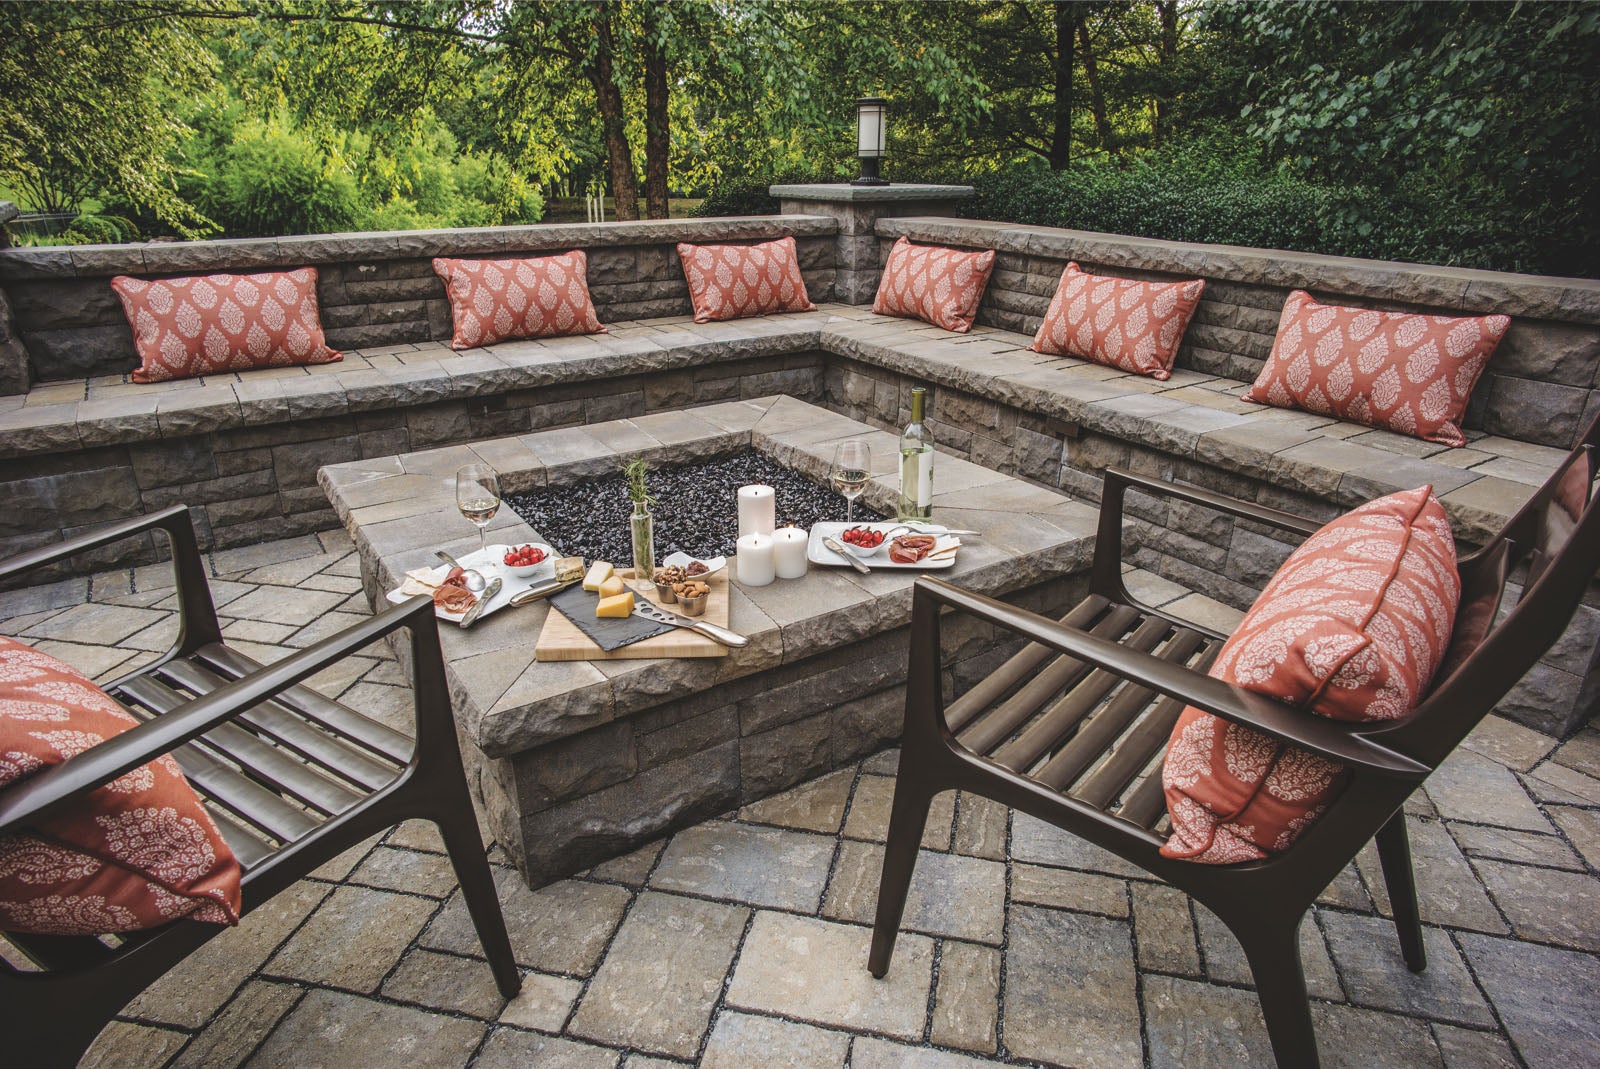 5 Tips For Designing A Patio Around A Fire Pit - Belgard